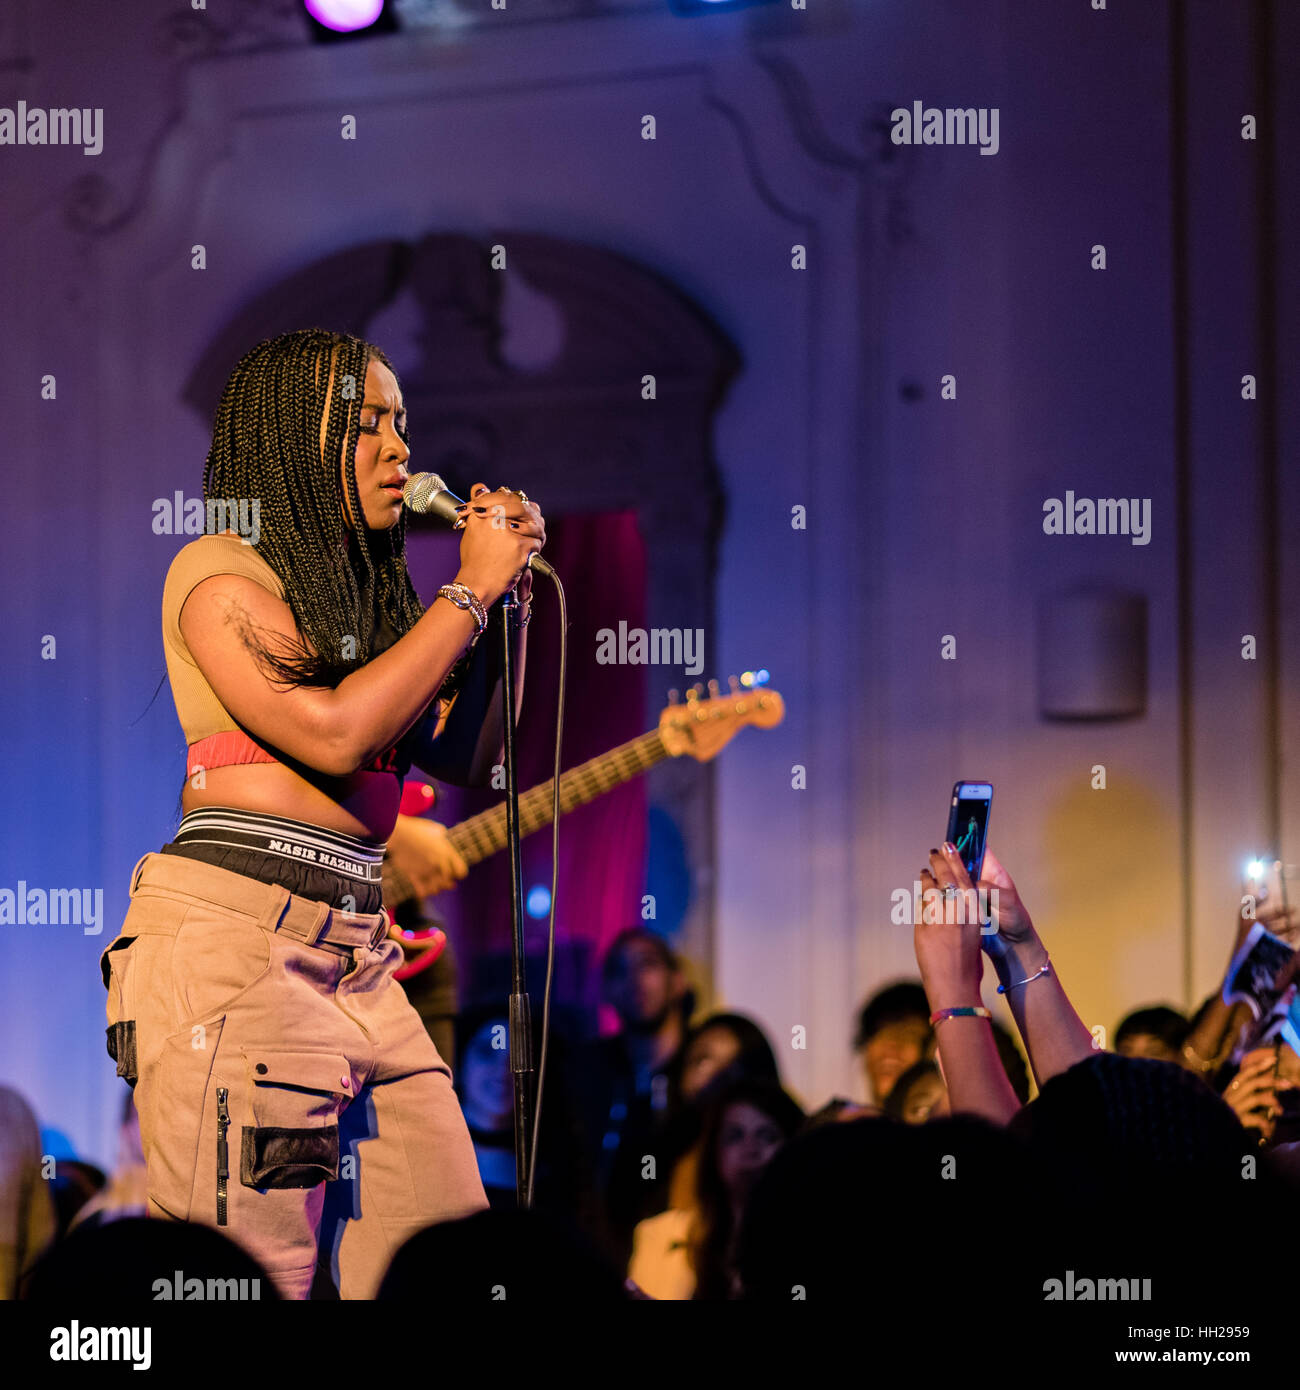 Ray BLK, UK singer, singing with her band at a live gig in September 2016. Stock Photo